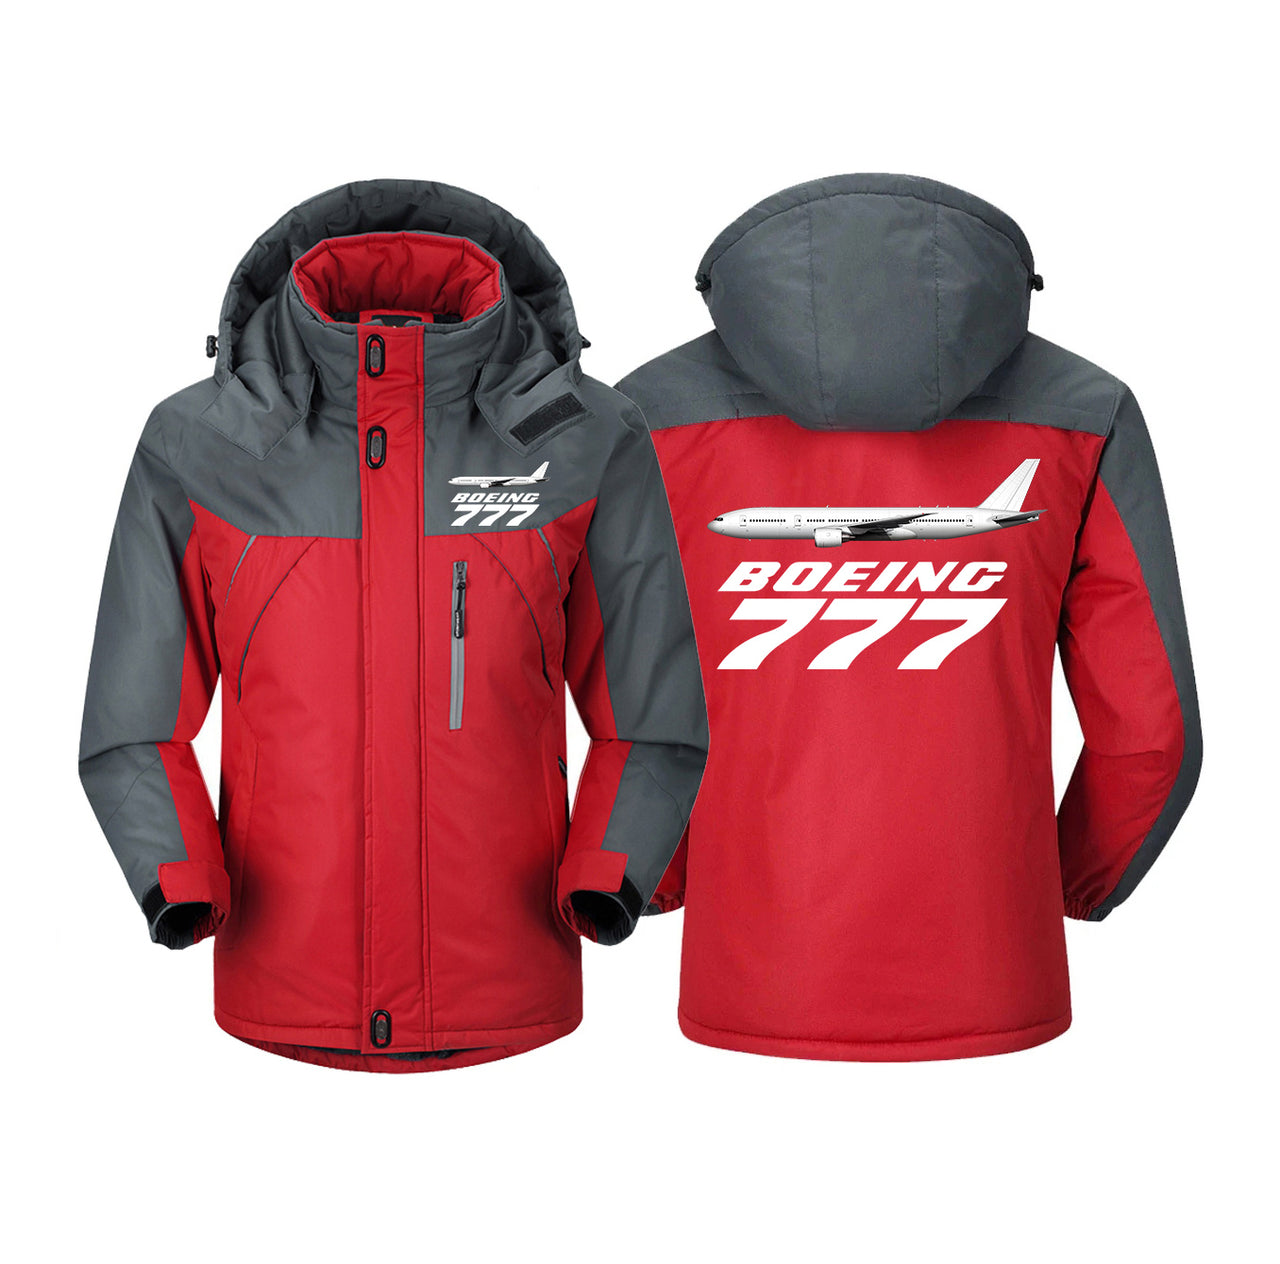 The Boeing 777 Designed Thick Winter Jackets